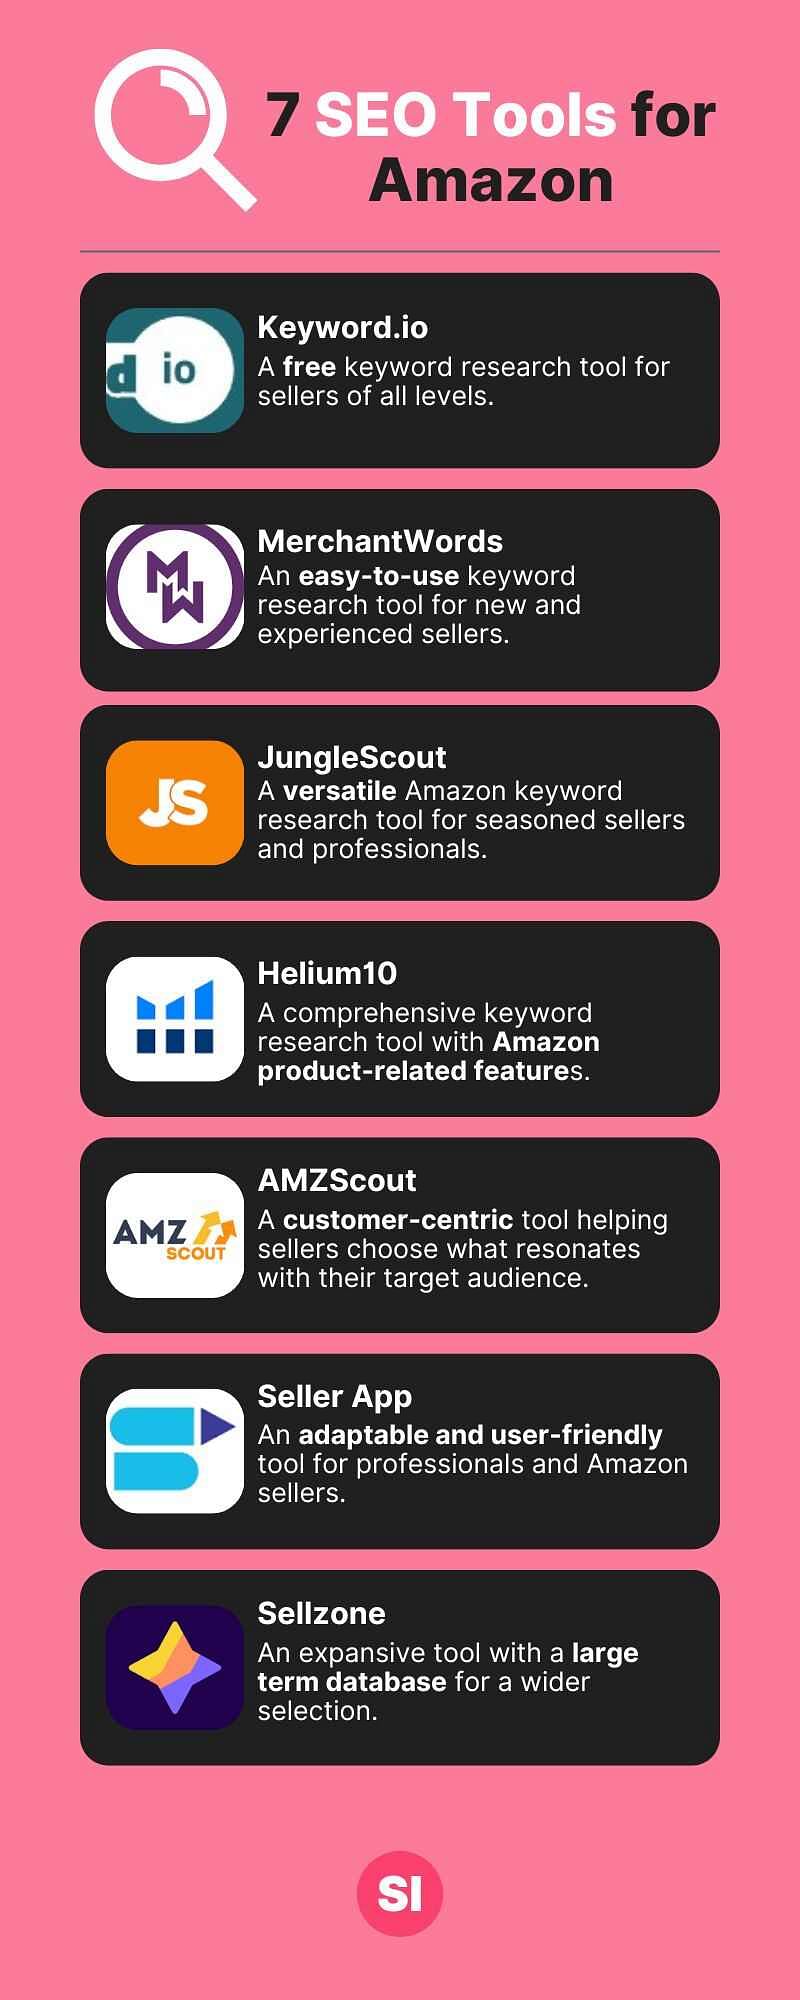 An infographic showing the logos of seven SEO tools along with their descriptions; Keyword.io, MerchantWords, JungleScout, Helium10, AMZScout, Seller App, Sellerzone